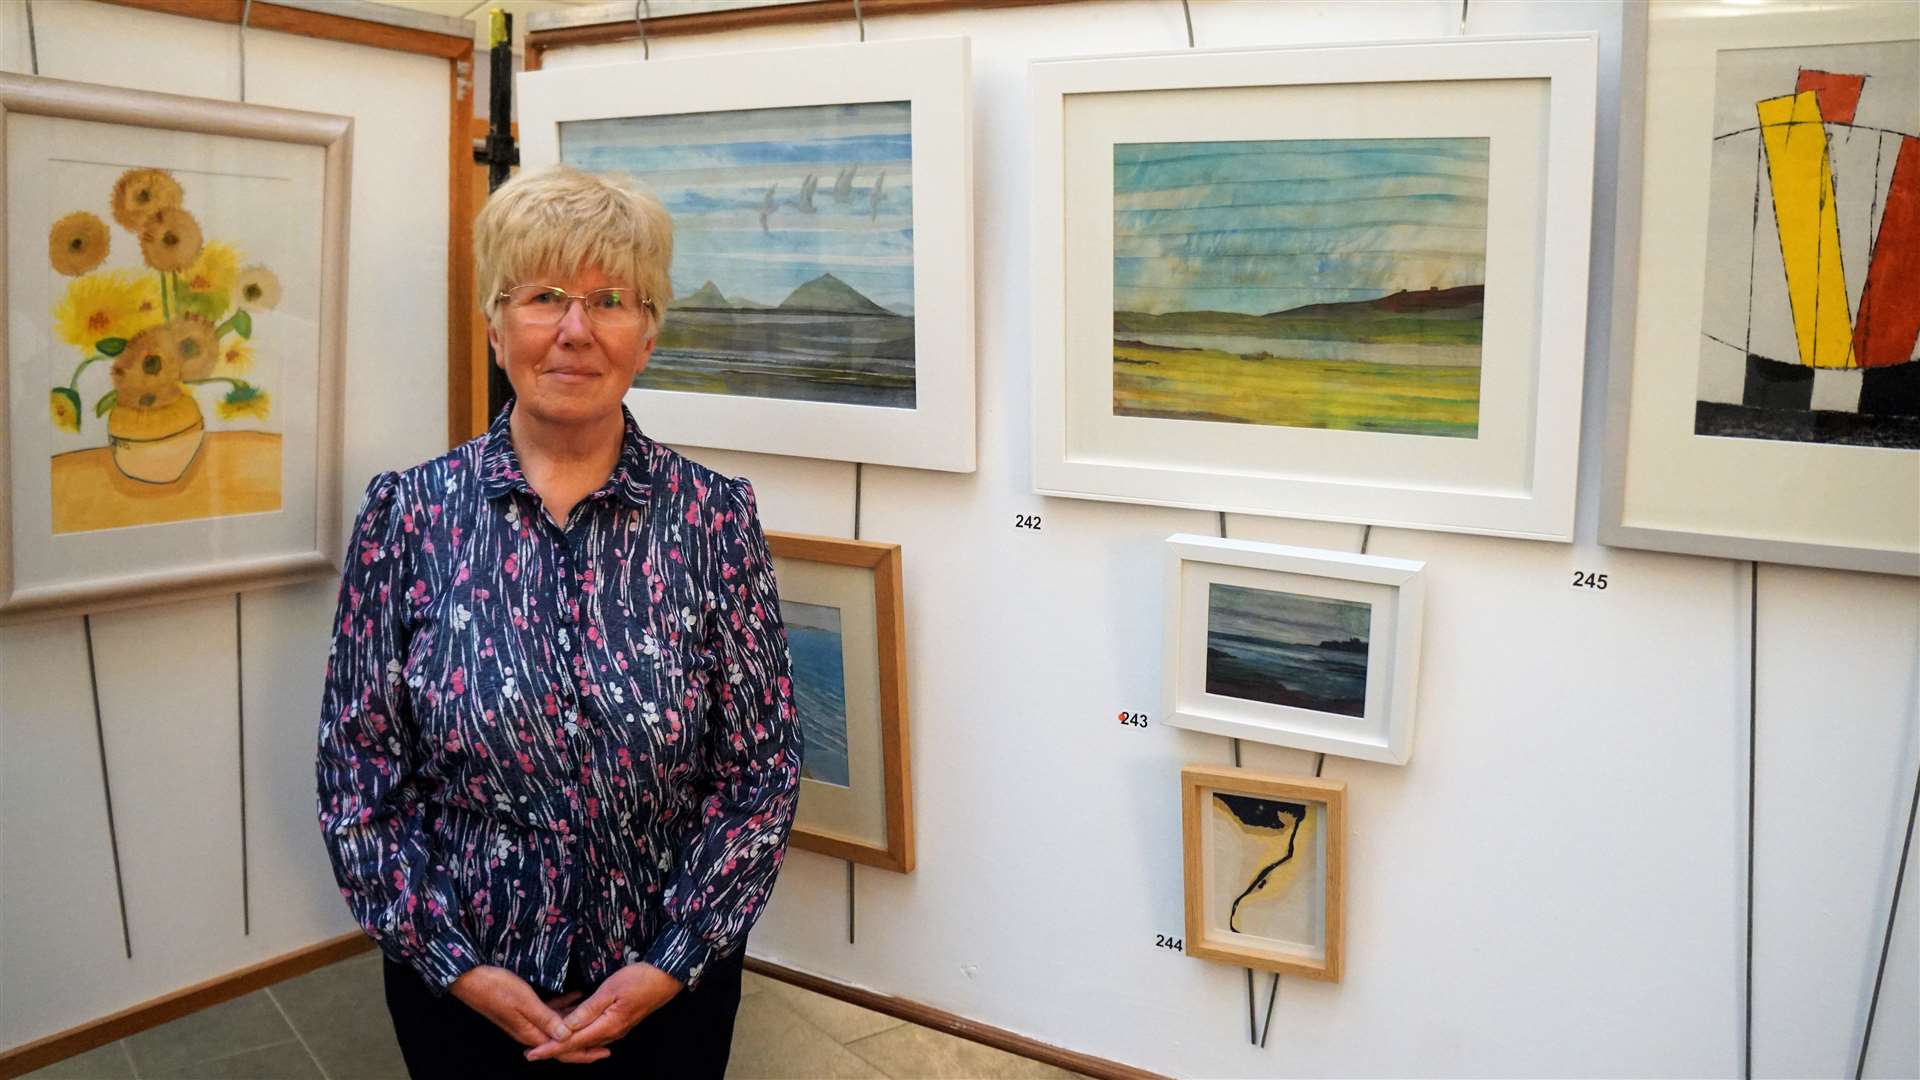 Valerie Barker at the Society of Caithness Artists exhibition in Thurso next to her own artworks. Valerie did a statistical analysis of how artists valued their works based on gender. Picture: DGS